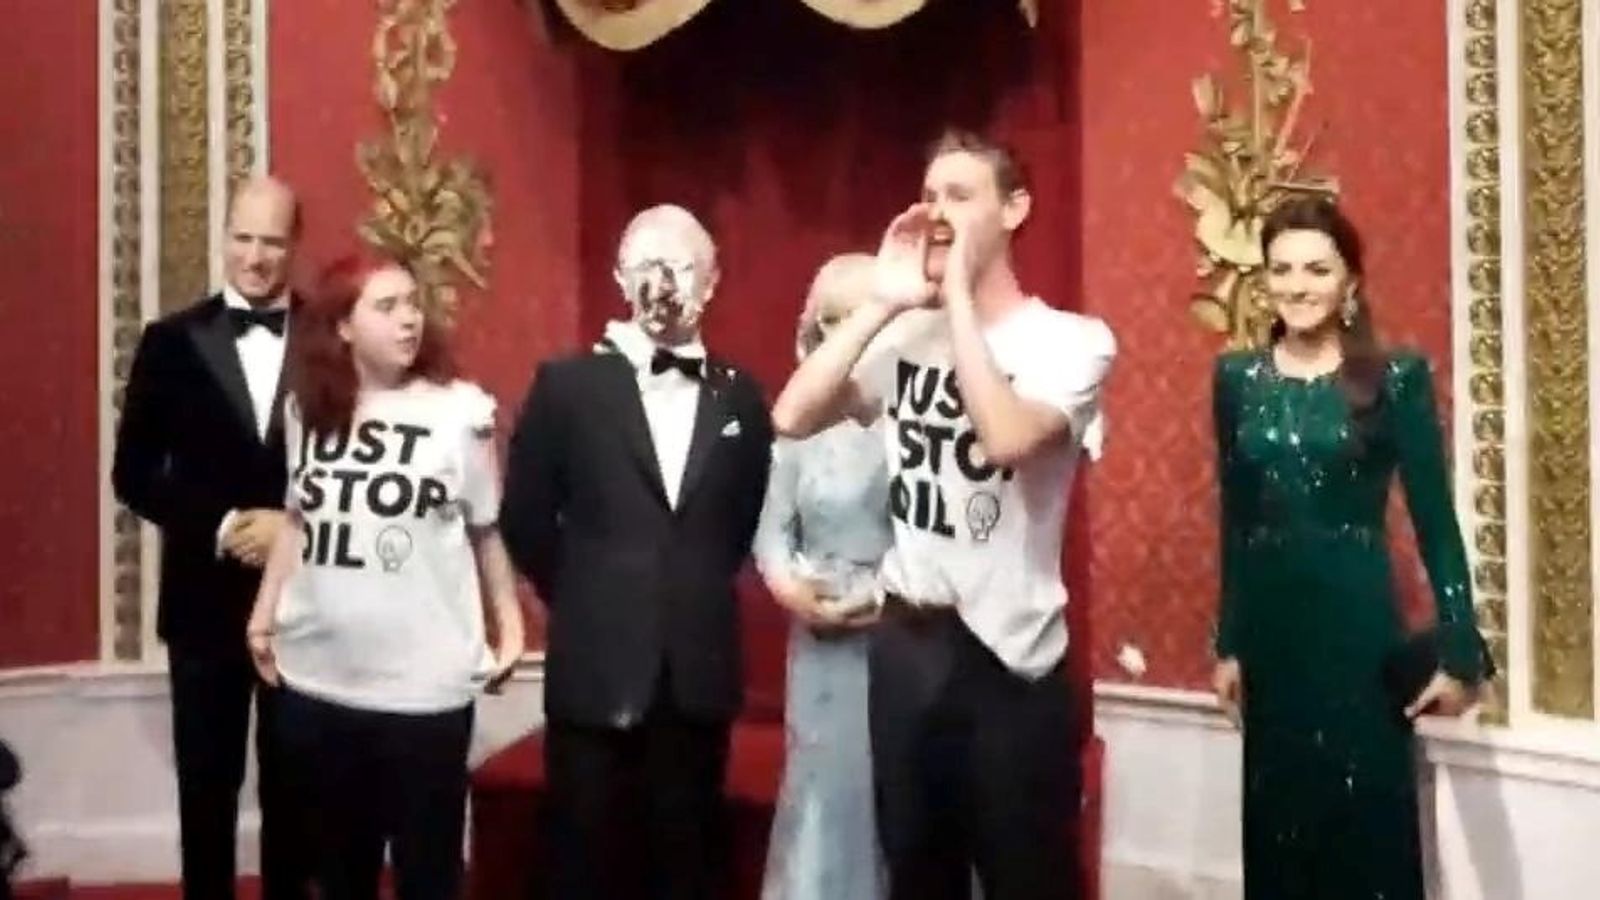 Just Stop Oil protesters smear King Charles III waxwork with chocolate cake